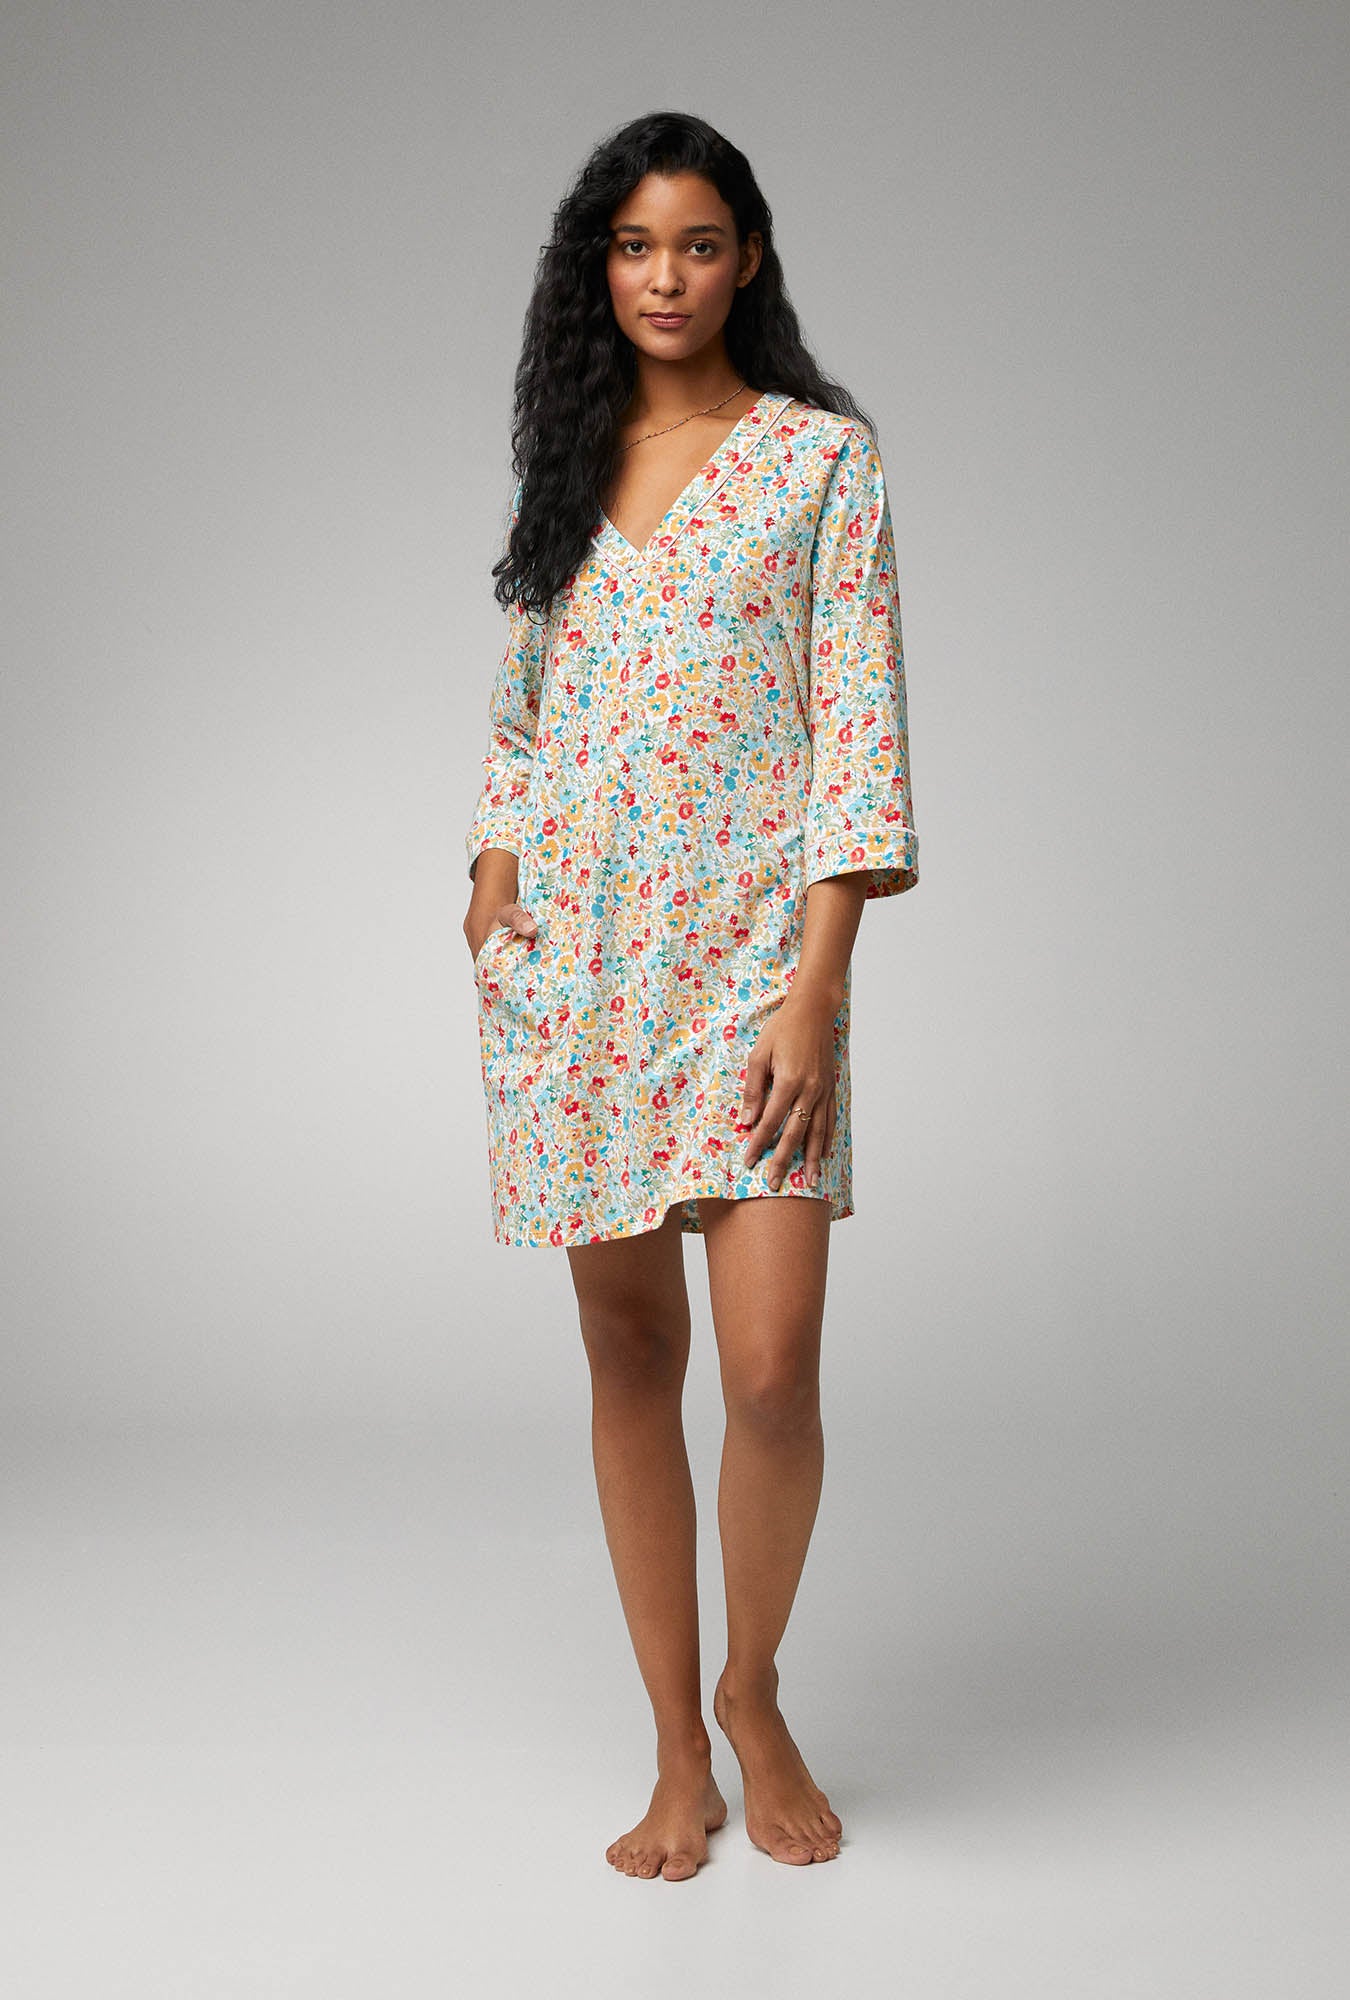 A lady wearing multi color quarter sleeve stretch jersey sleepshirt with inflorescence print.